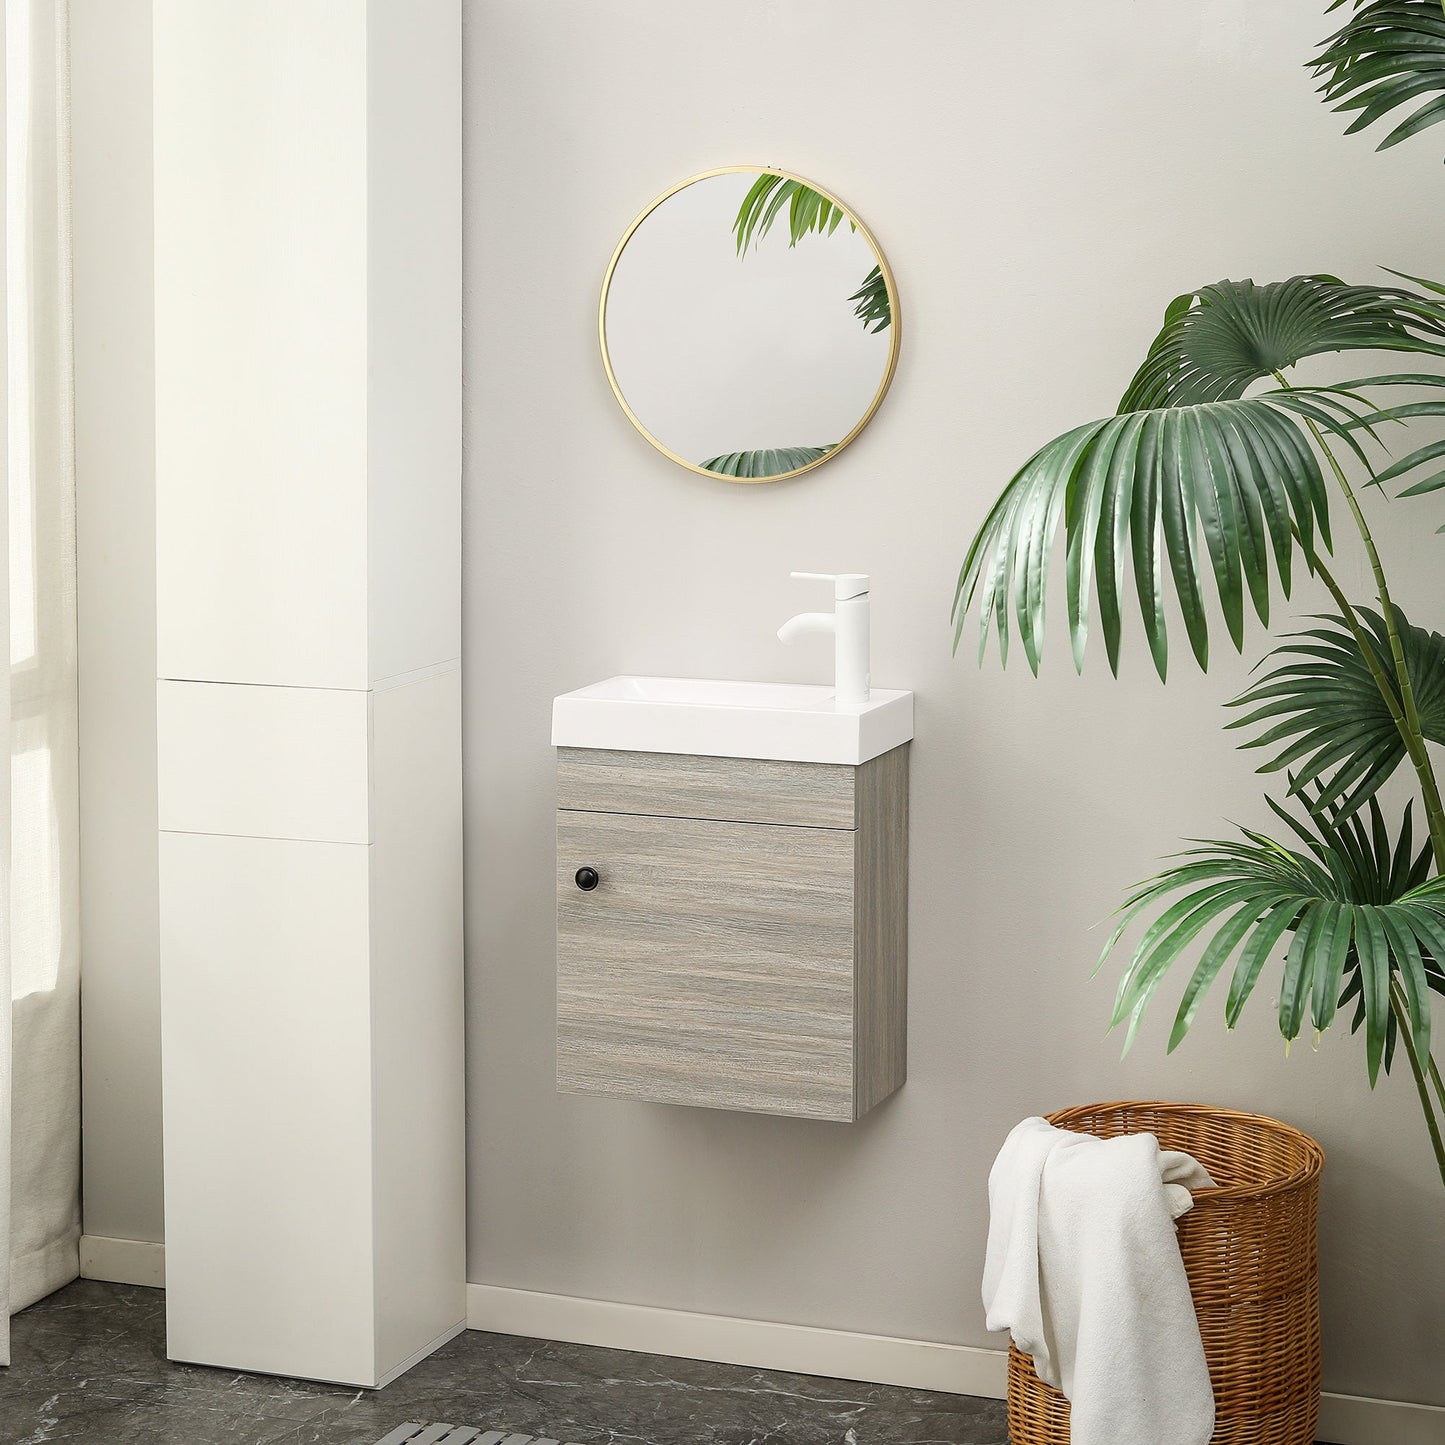 kleankin Bathroom Vanity Unit with Basin, Wall Mounted Bathroom Wash Stand with Sink, Tap Hole and Storage Cabinet, Grey